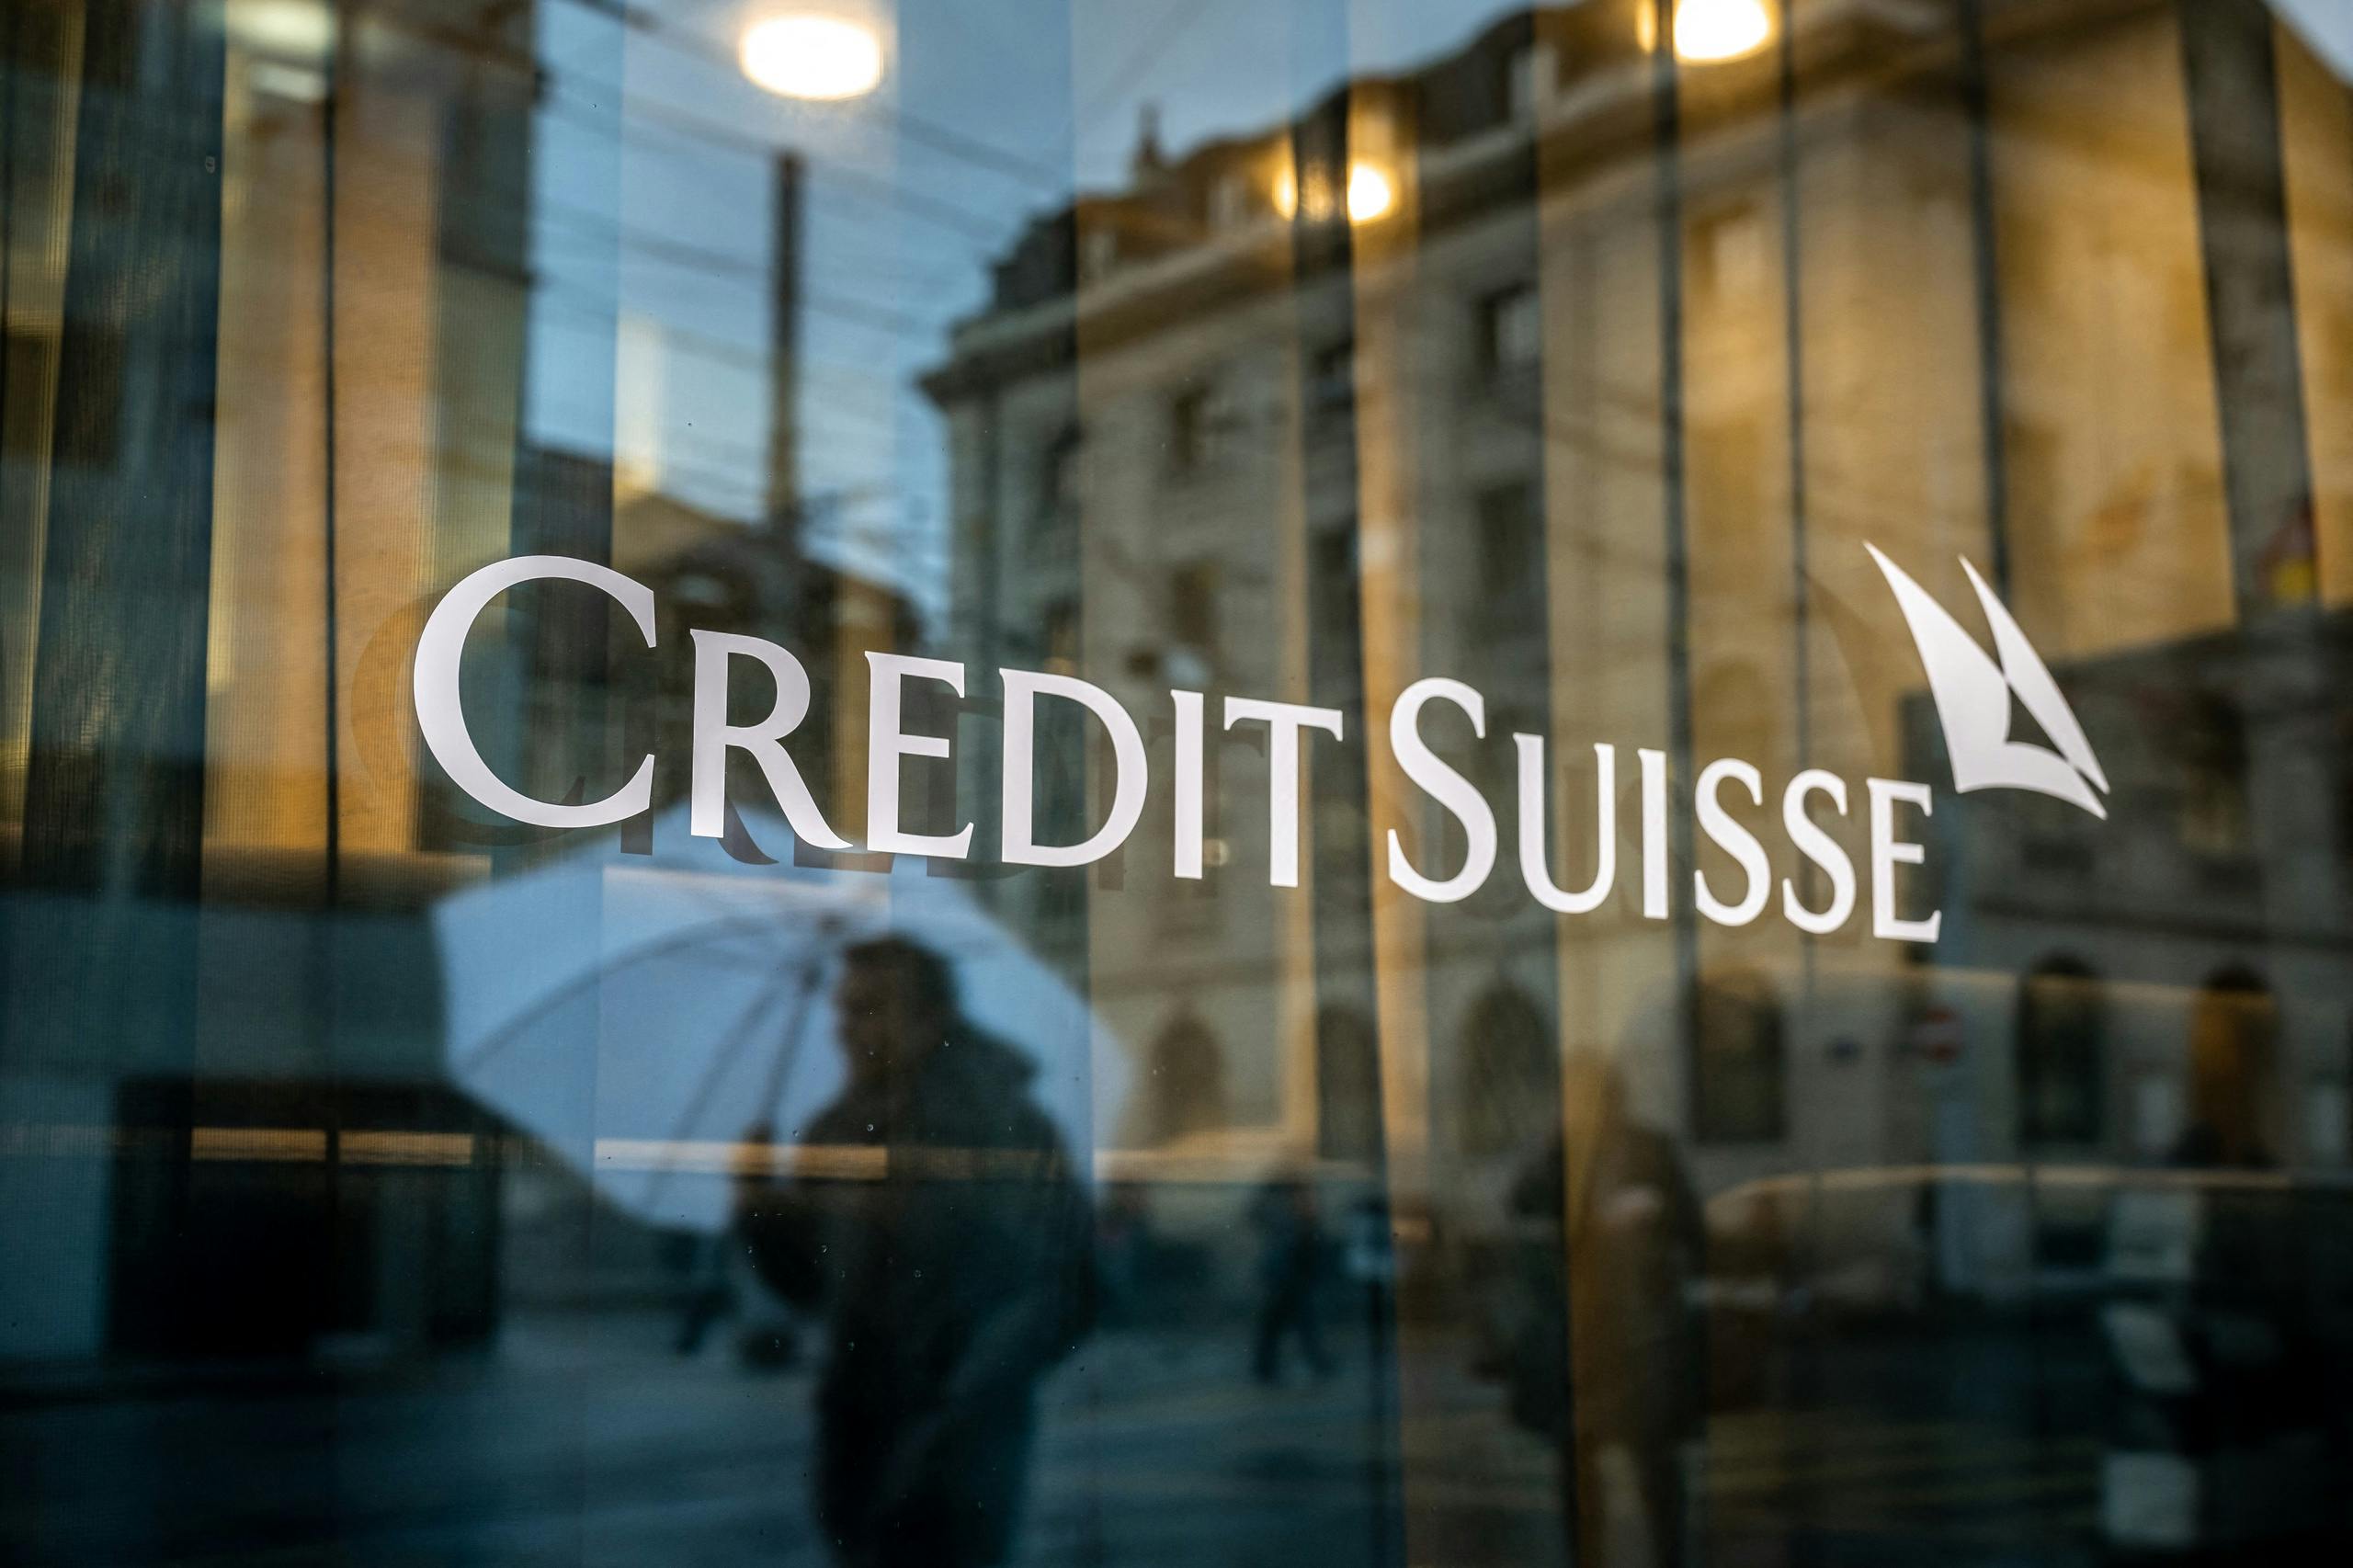 “Credit Suisse can’t last a day longer”